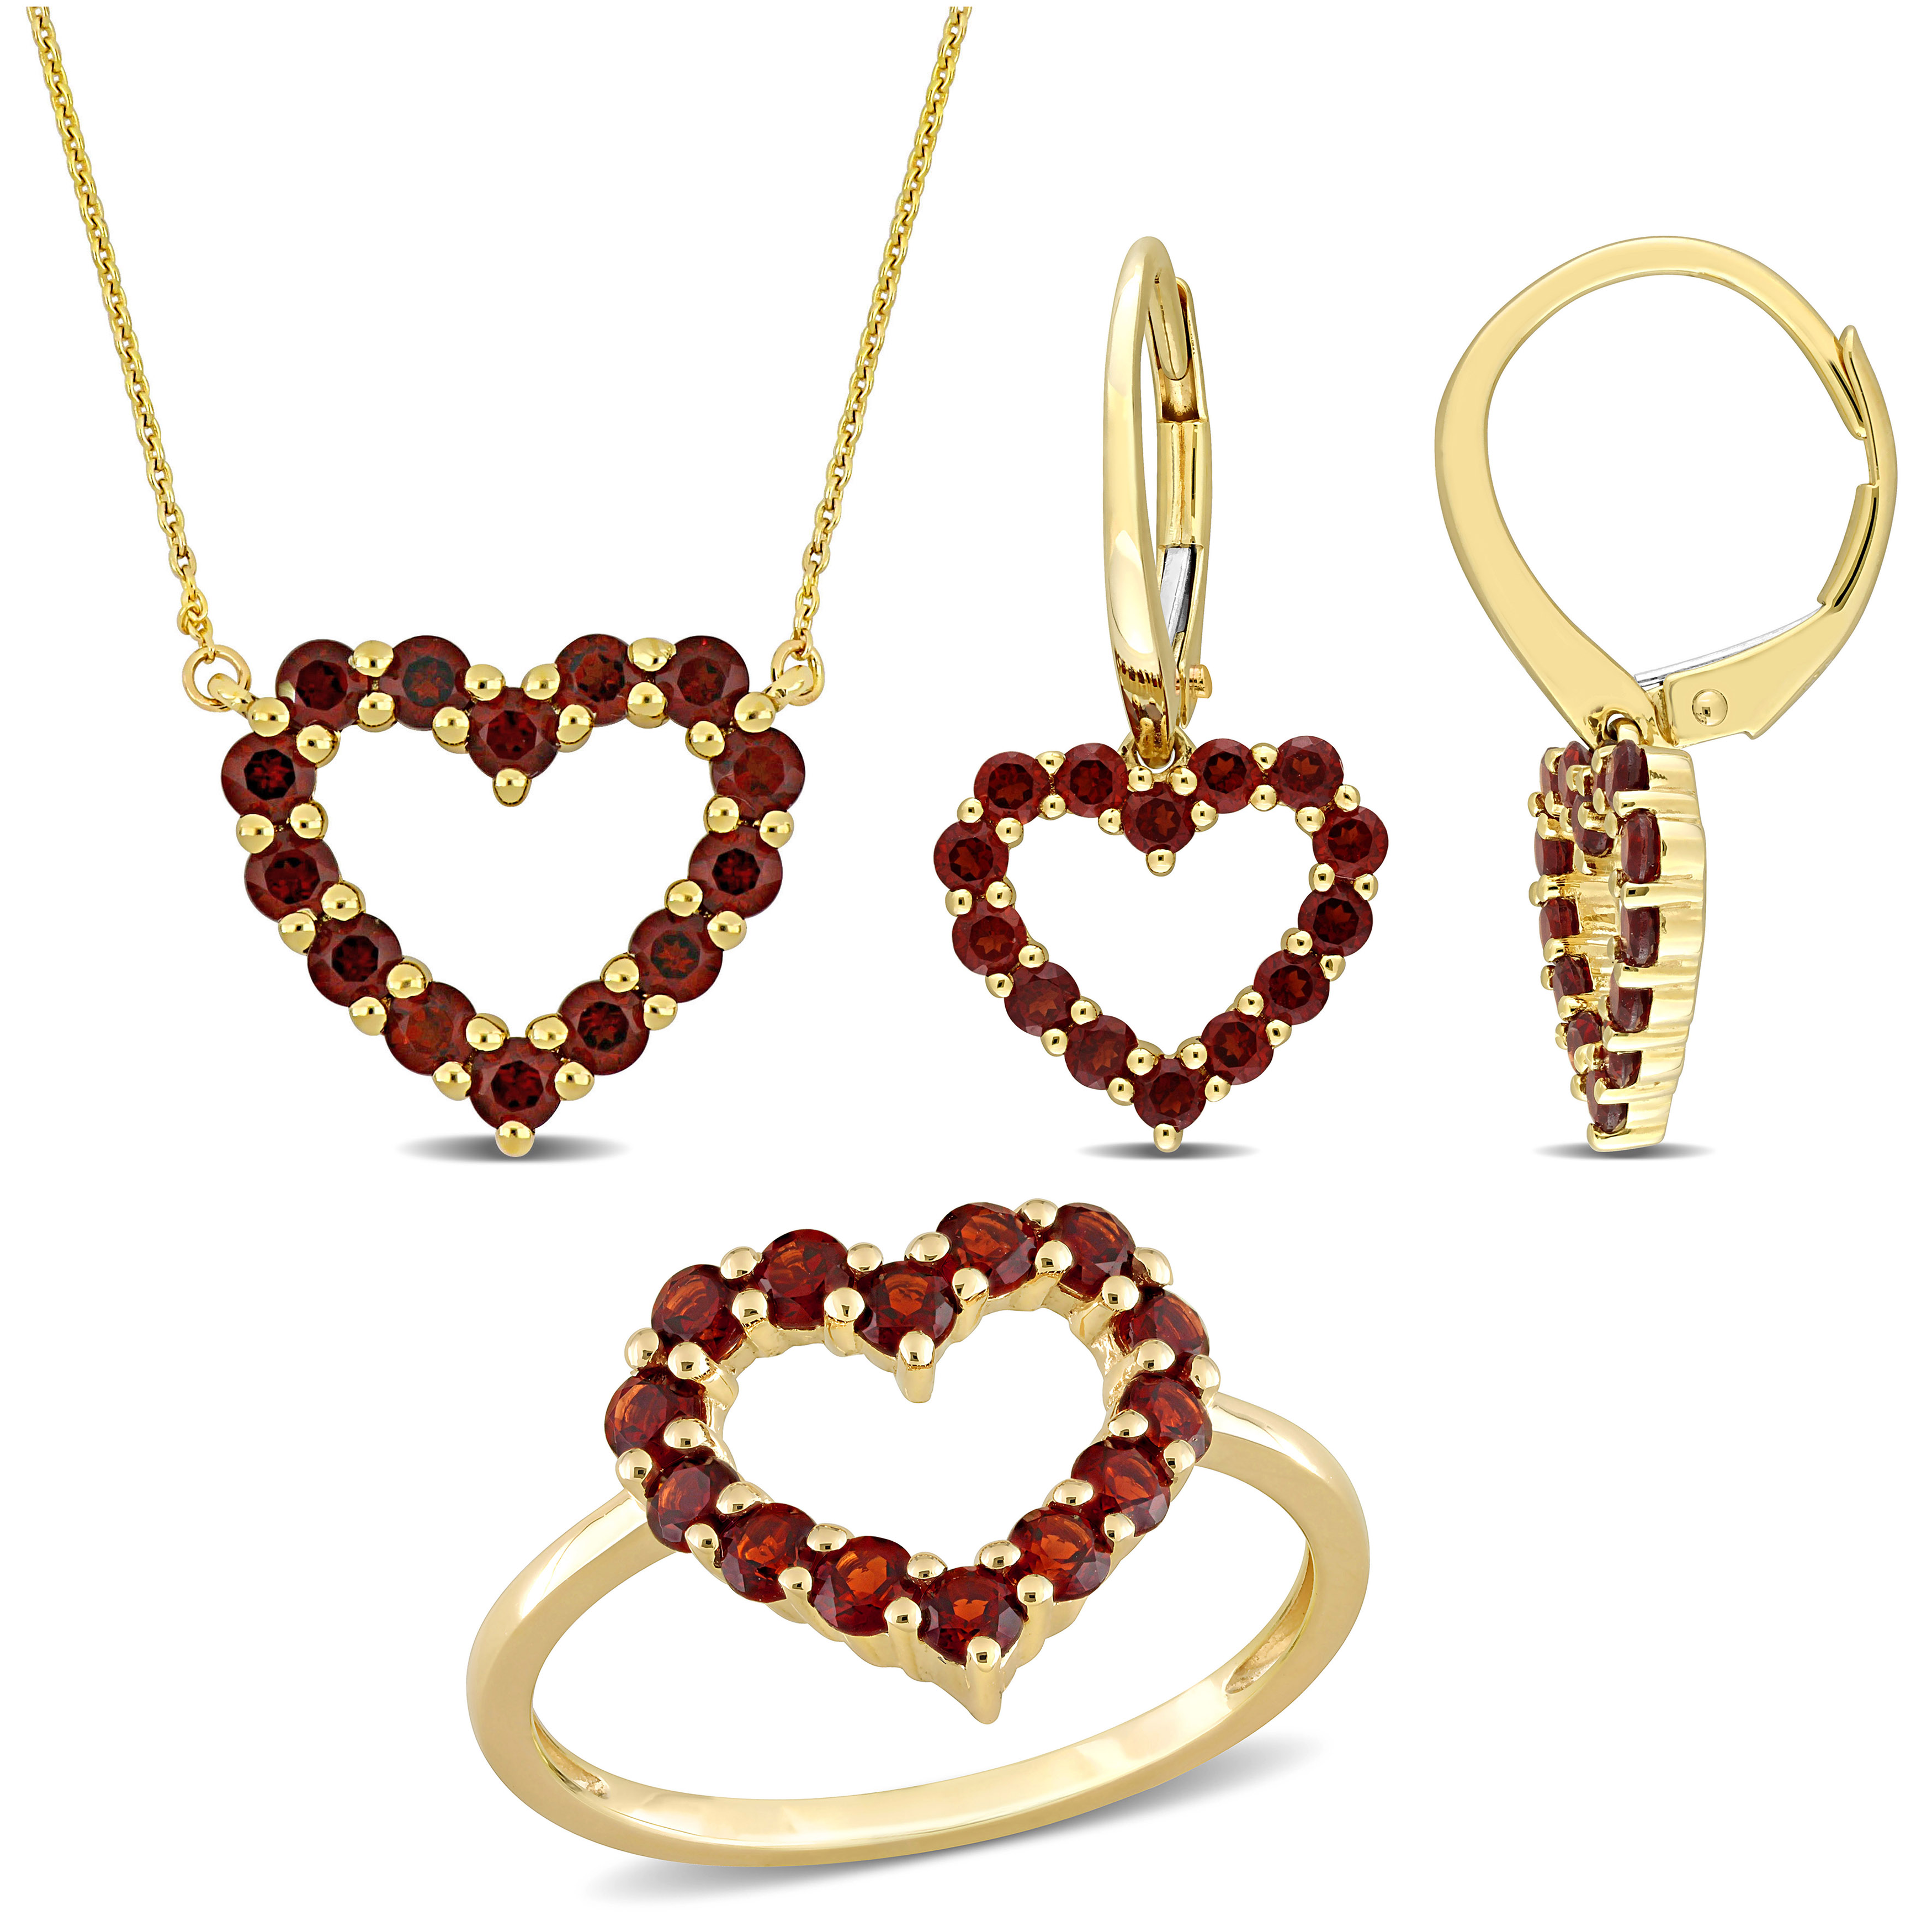 3 1/4 CT TGW Garnet 3-Piece Jewelry Set - Heart Pendant with Chain, Earrings and Ring in 10k Yellow Gold